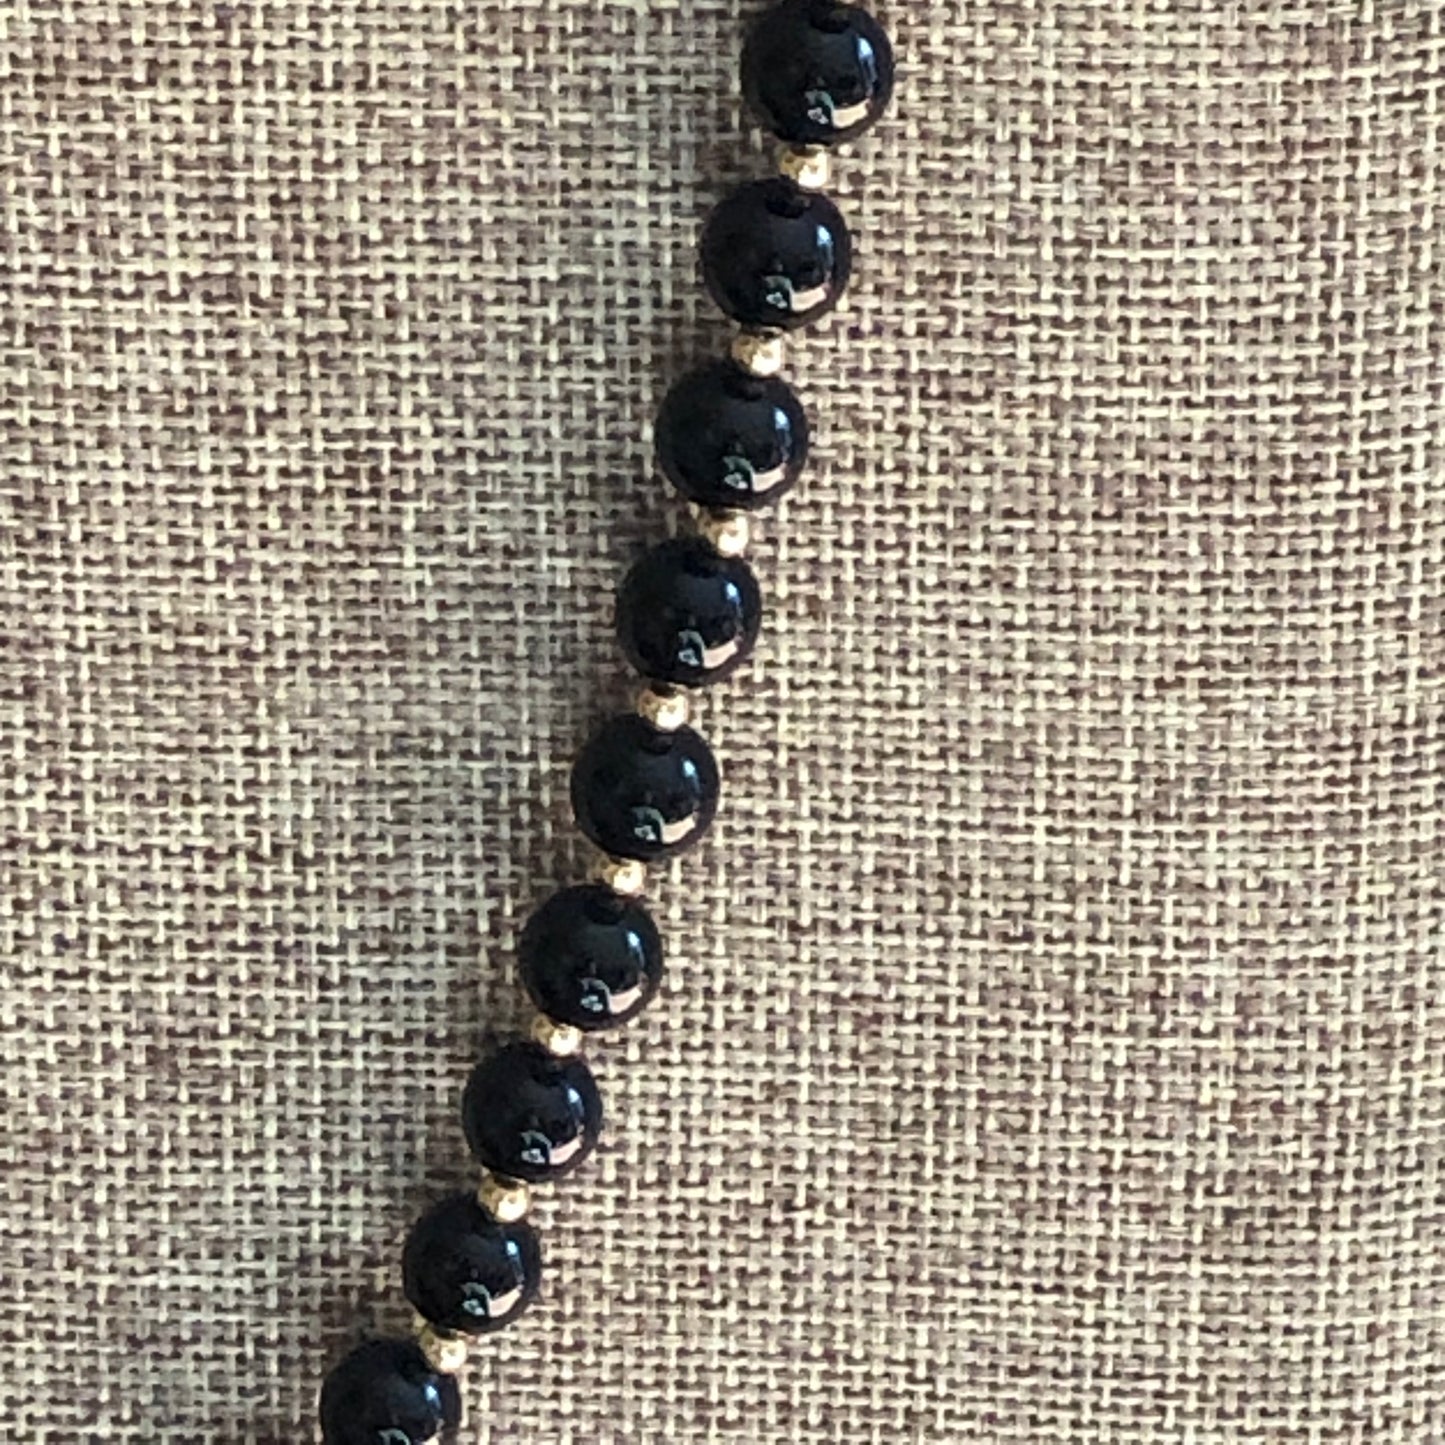 14k Yellow Gold and Black Onyx Bead Necklace